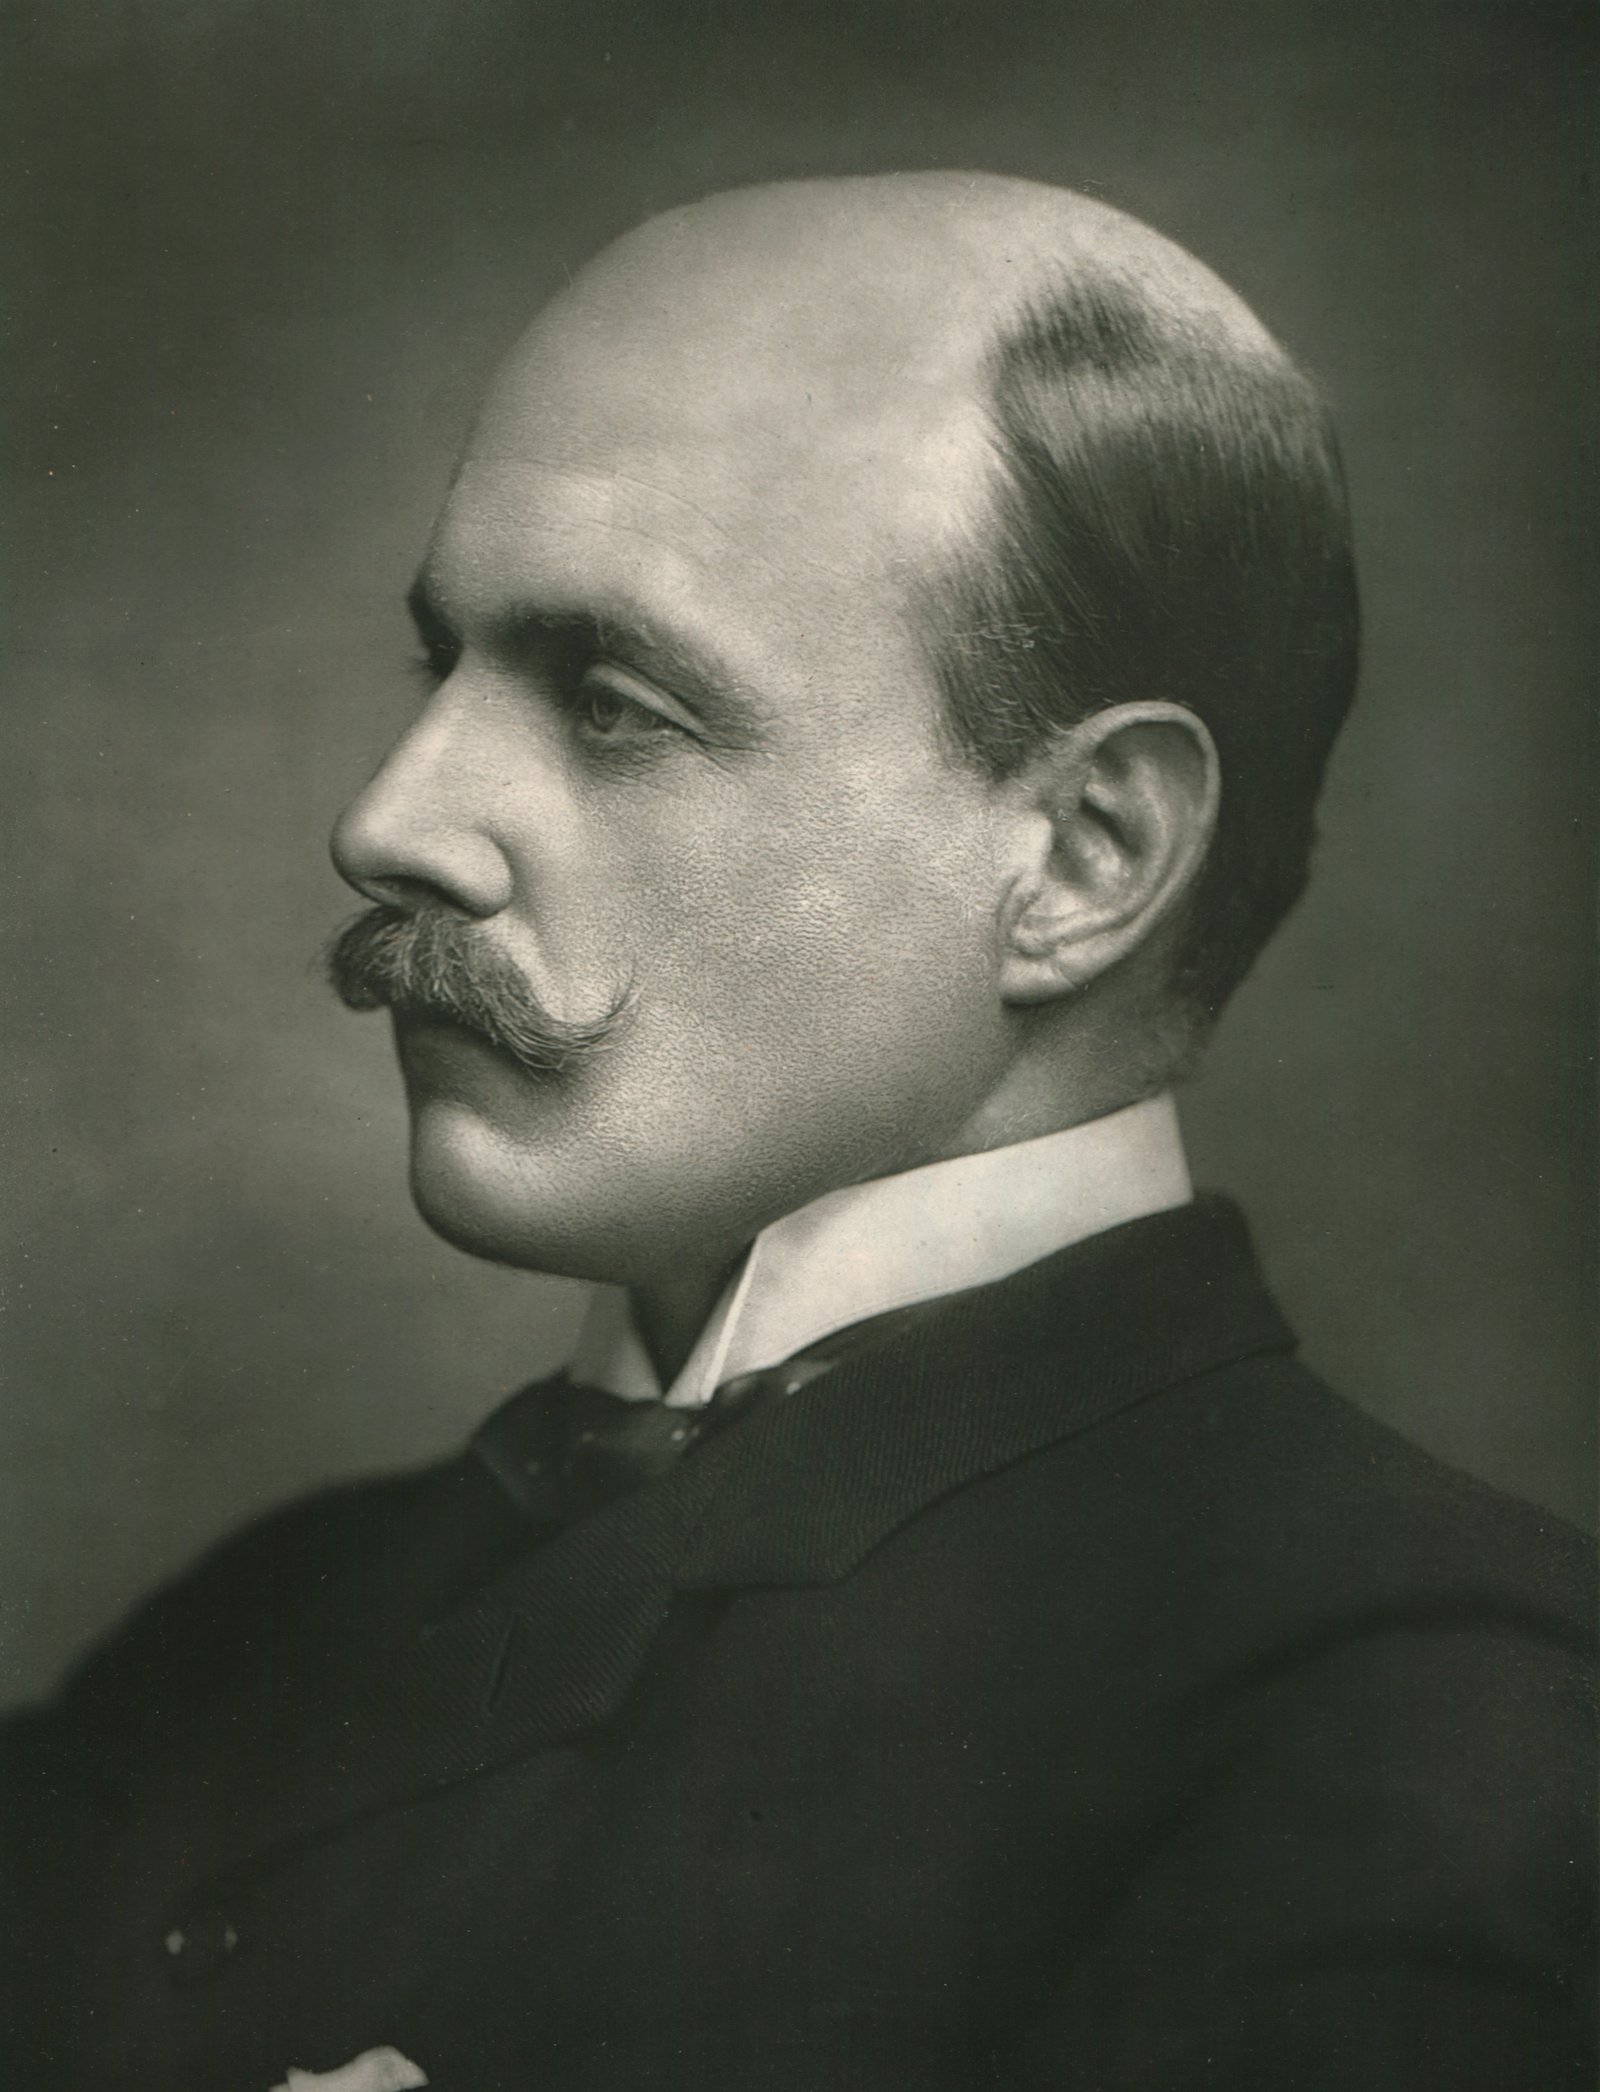 Image - Walter Long, circa 1902. (Source: The Print Collector/Getty Images)